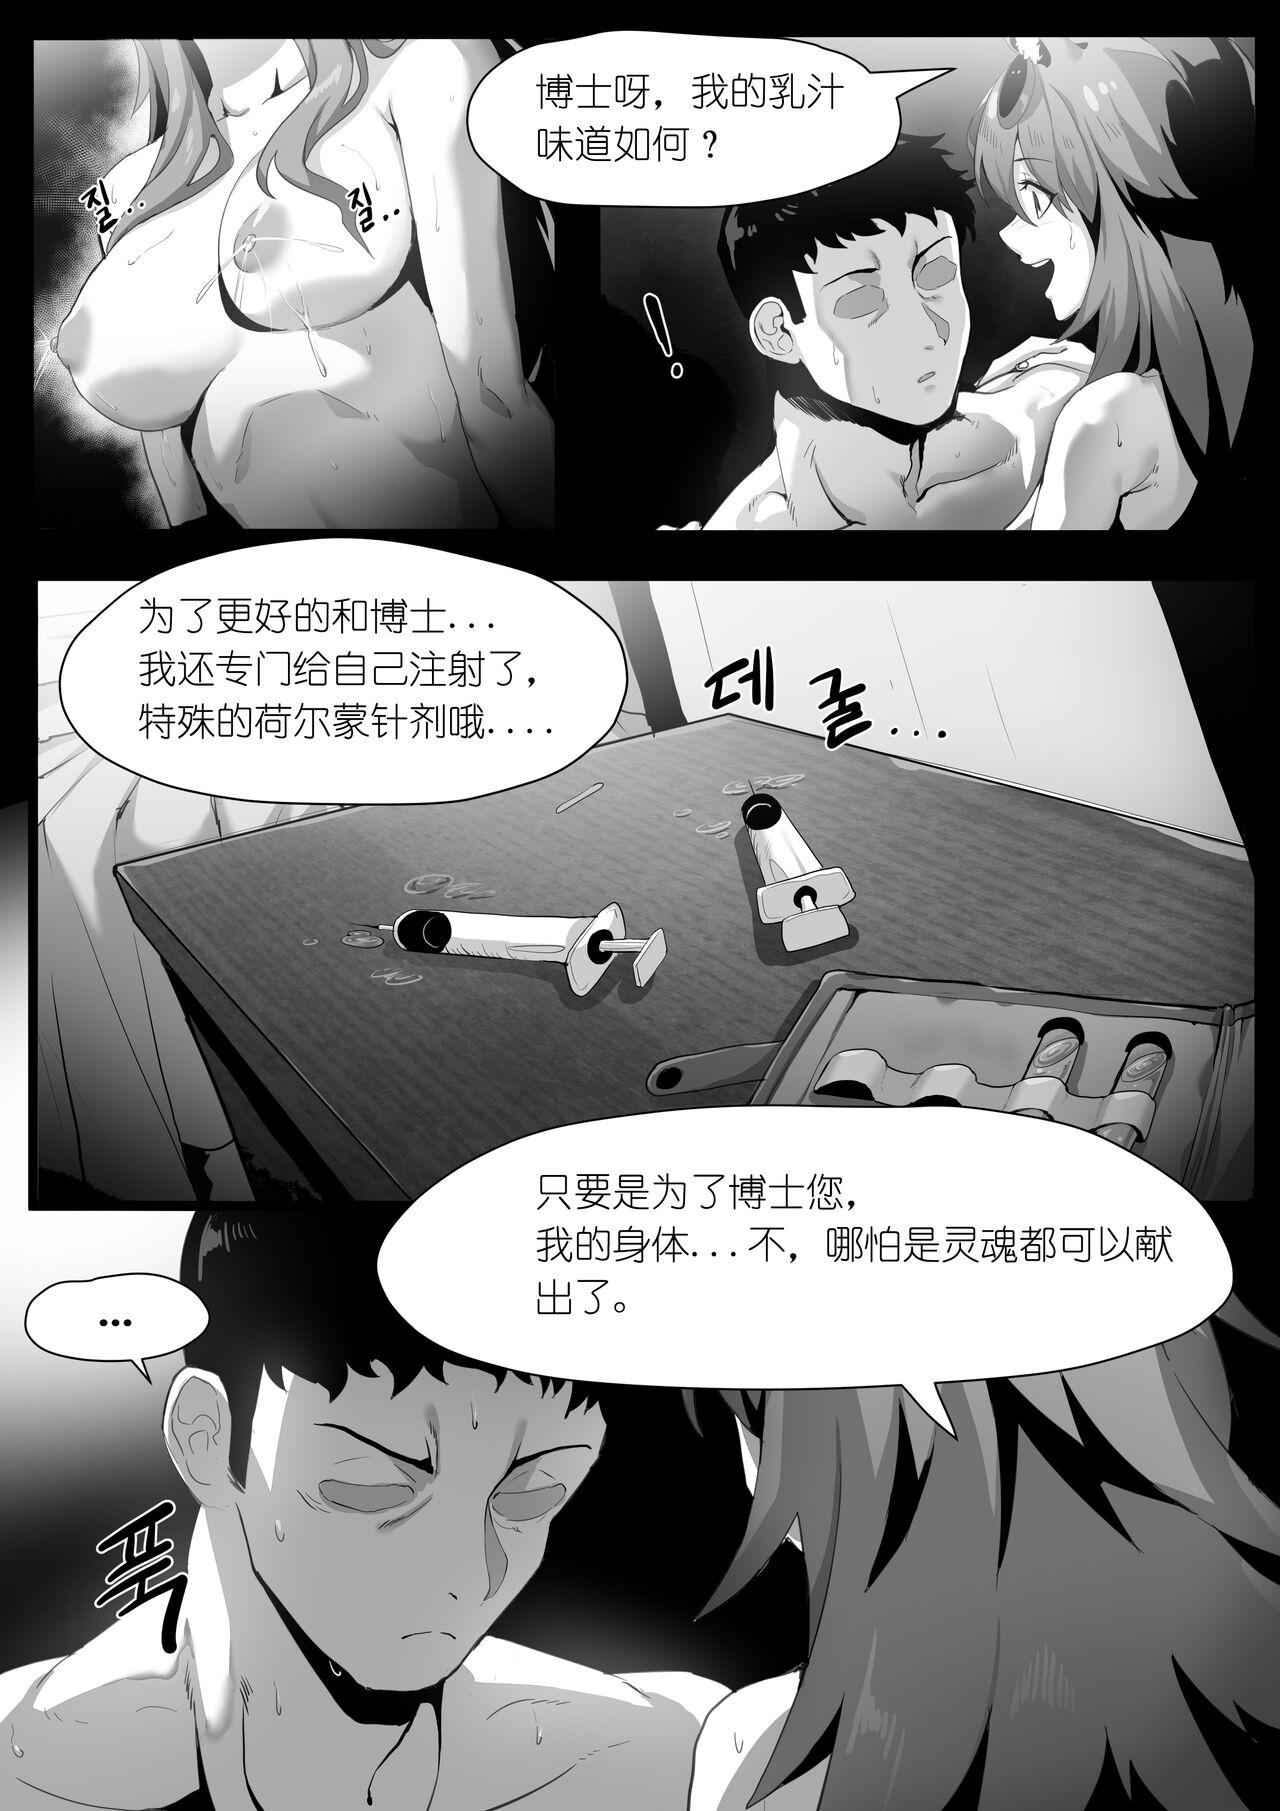 Creampie 欲望方舟记录3 - Arknights Made - Page 4